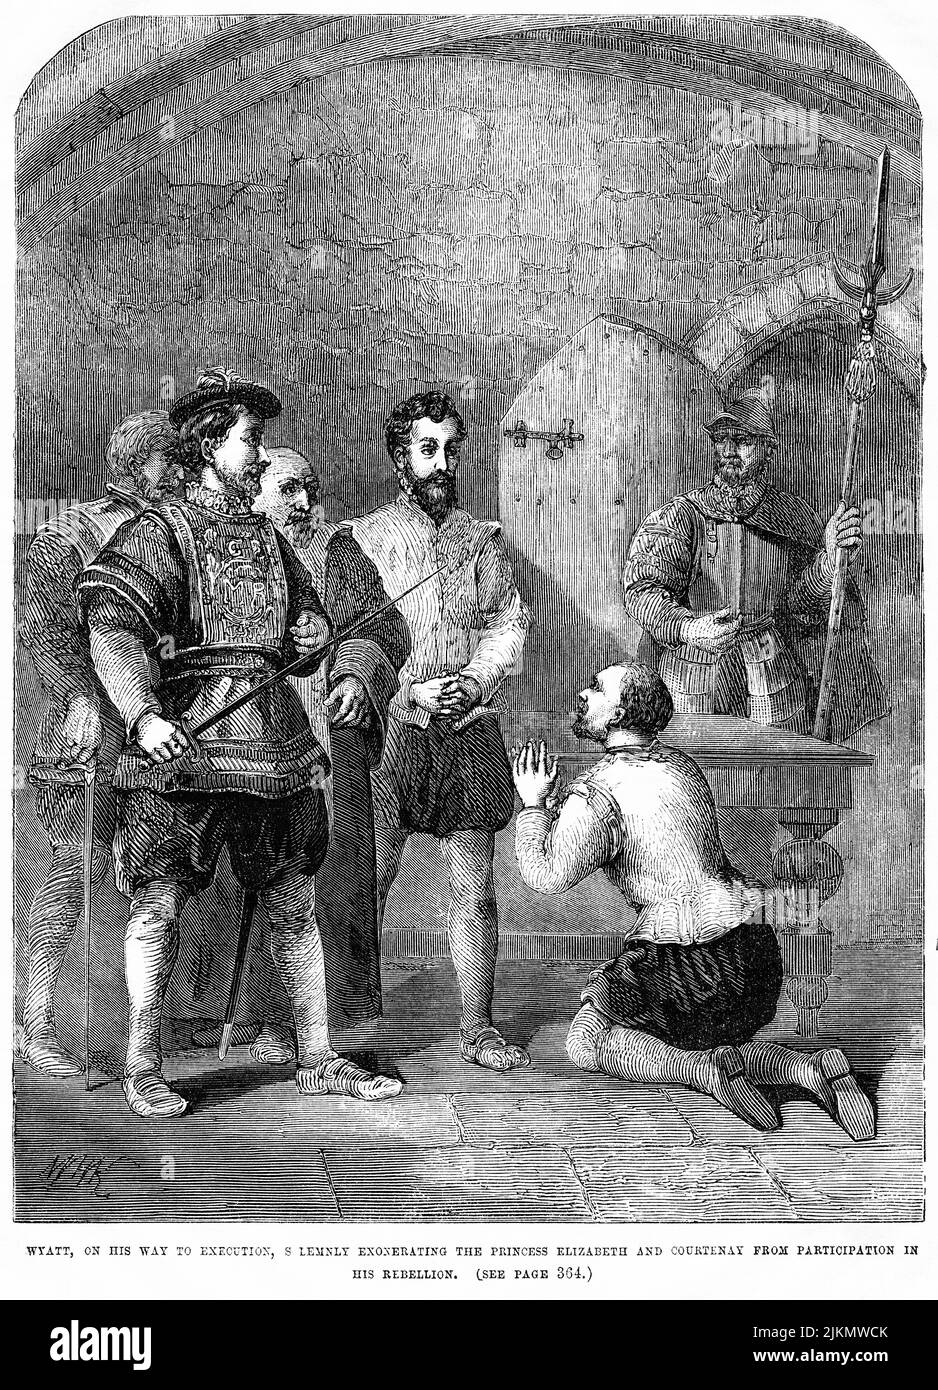 Wyatt, on his way to Execution solemnly exonerating the princess Elizabeth and Courtenay from participation in his rebellion, Illustration from the Book, 'John Cassel’s Illustrated History of England, Volume II', text by William Howitt, Cassell, Petter, and Galpin, London, 1858 Stock Photo